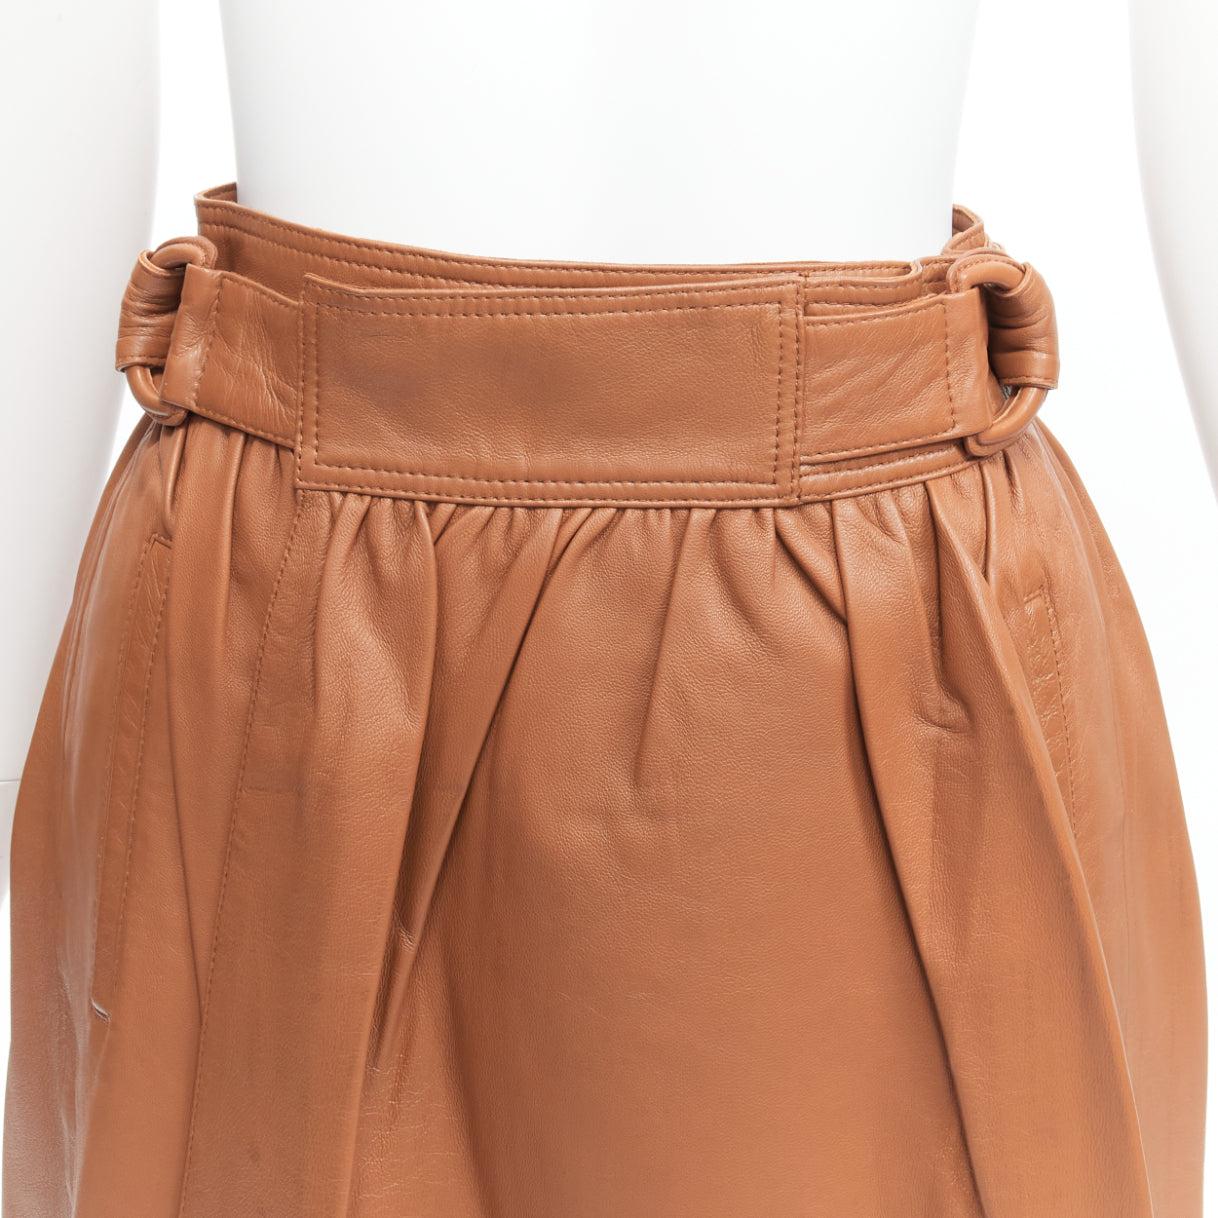 JOSEPH Betty brown lambskin leather belted A-line midi wrap skirt FR34 XS
Reference: SNKO/A00317
Brand: Joseph
Model: Betty
Material: Lambskin Leather
Color: Brown
Pattern: Solid
Closure: Belt
Lining: Brown Fabric
Extra Details: Wrap and button